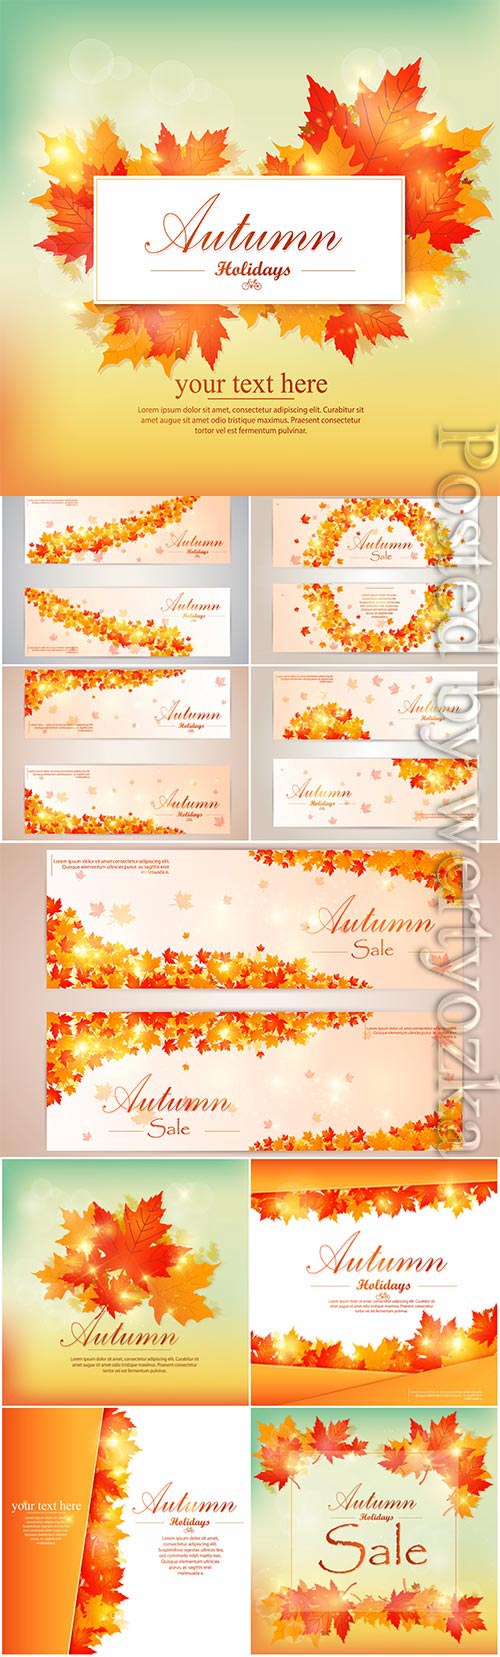 Autumn backgrounds and banners with yellow leaves in vector